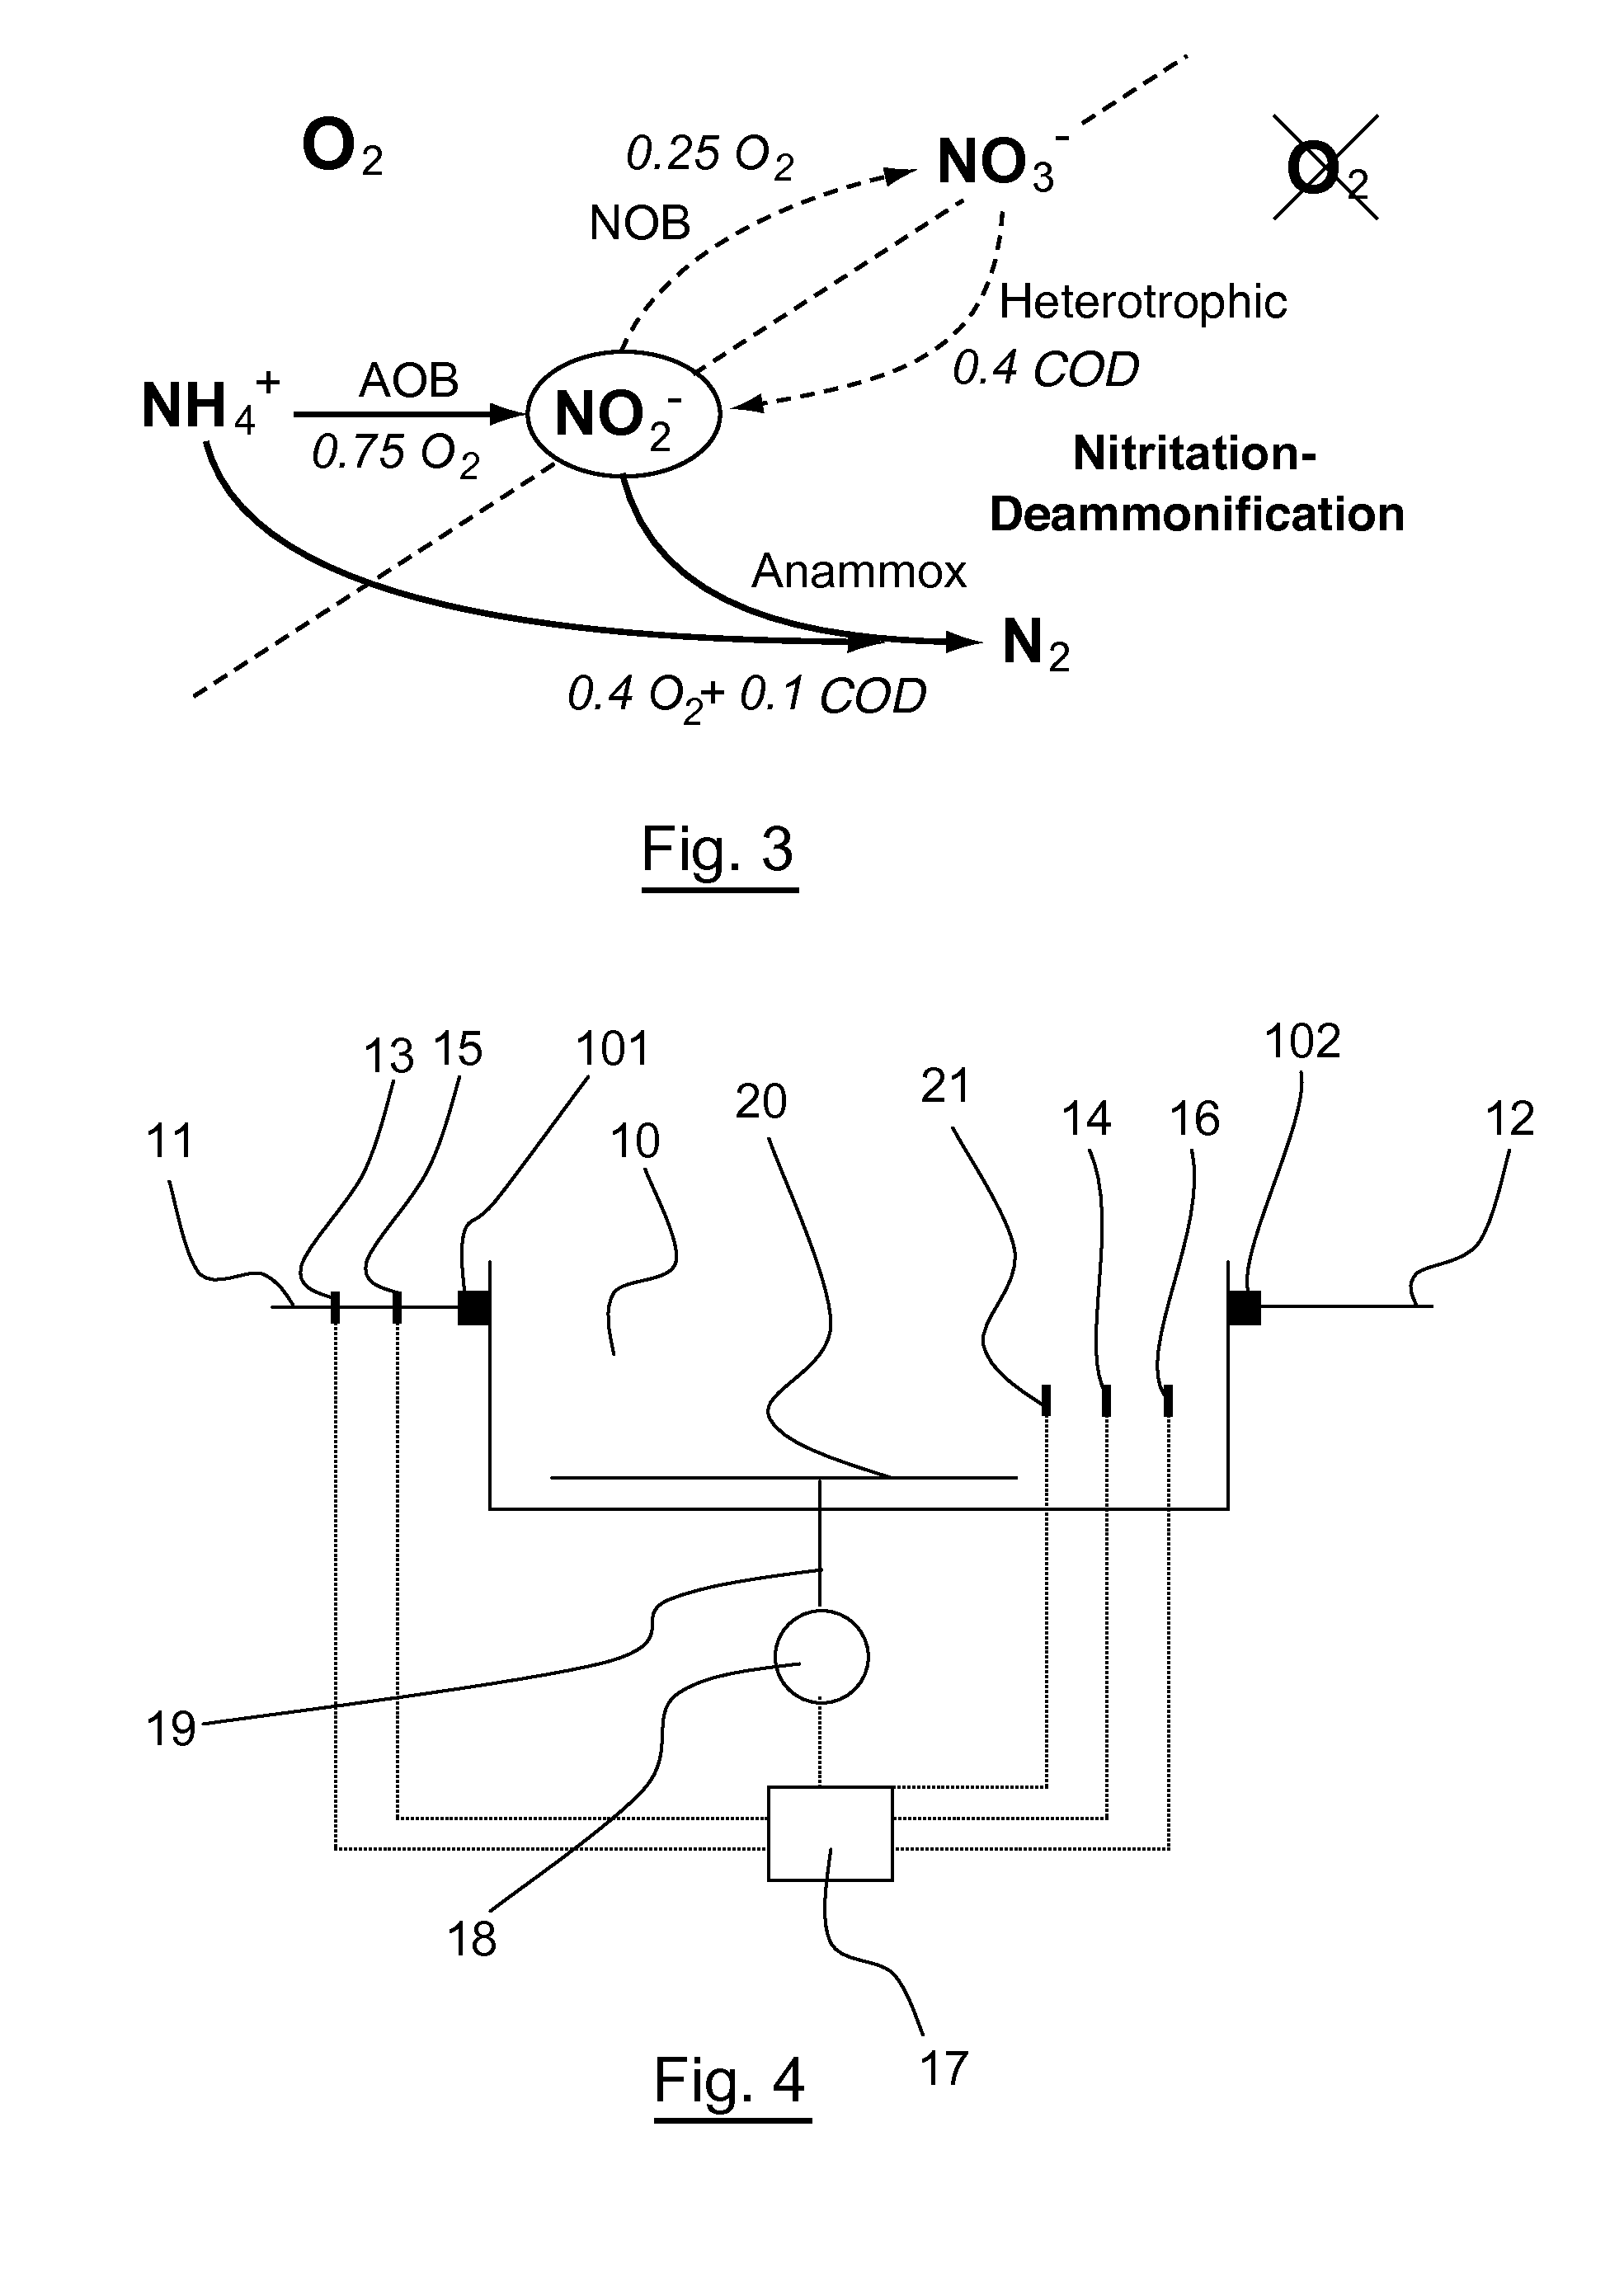 Process for Treating Water by Nitritation-Denitration Comprising at Least One Aerated Step and One Step for Controlling the Oxygen Input During the Aerated STep